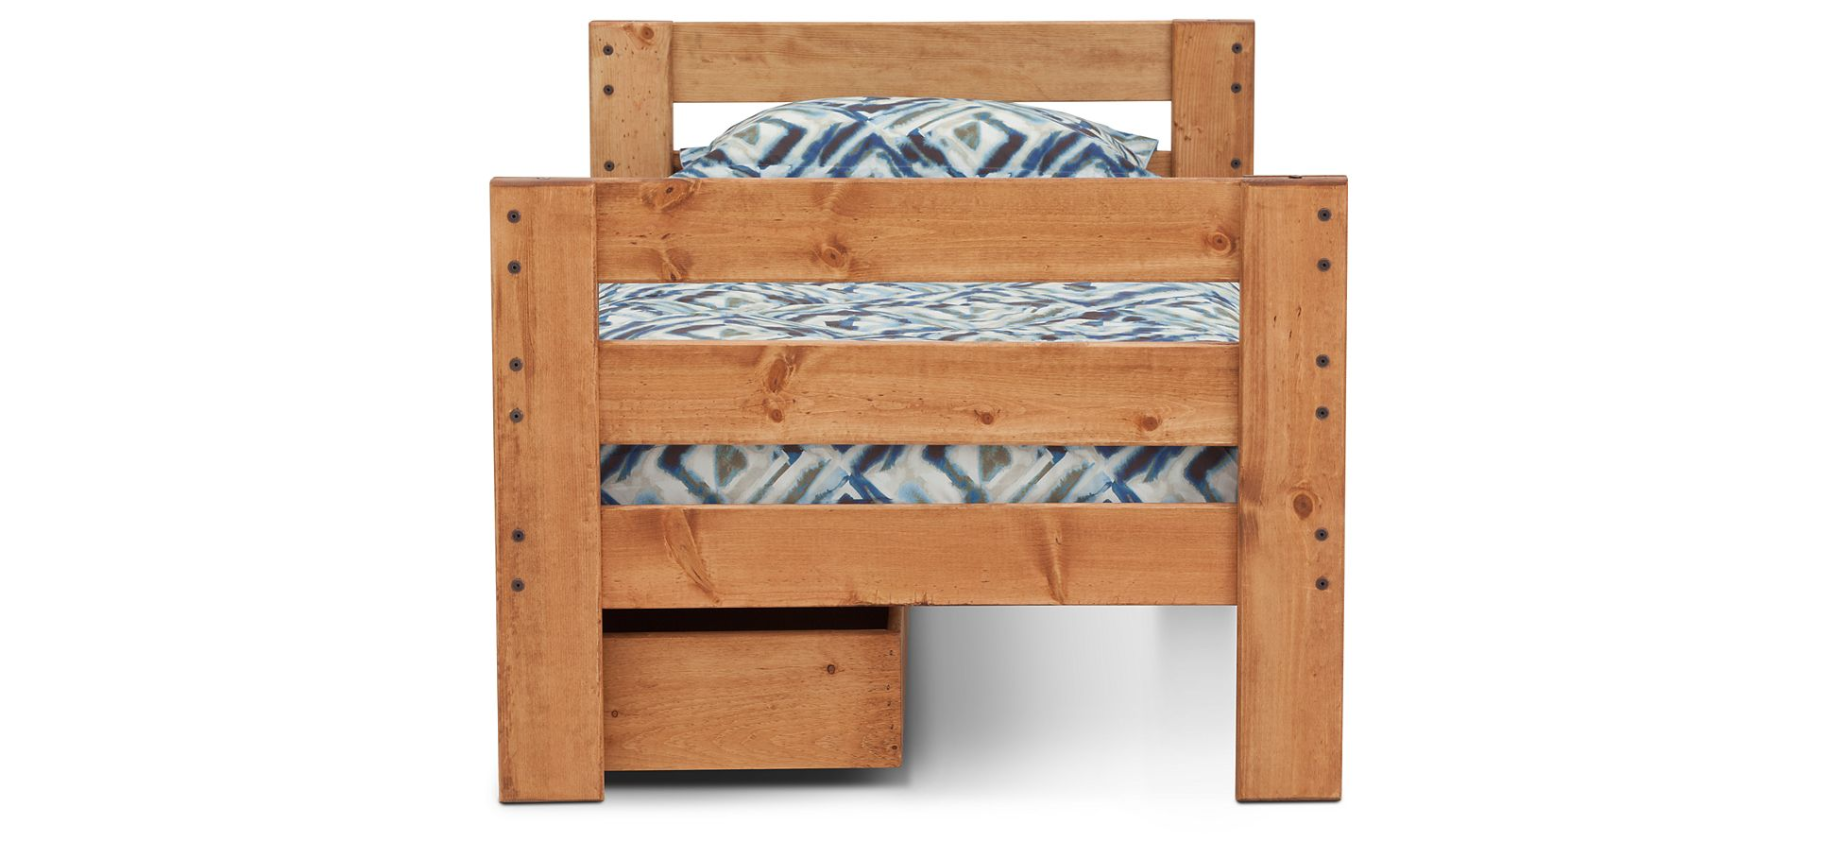 Durango Panel Bed with 6" Storage Drawers in TWIN Size - M&J Design Furniture 